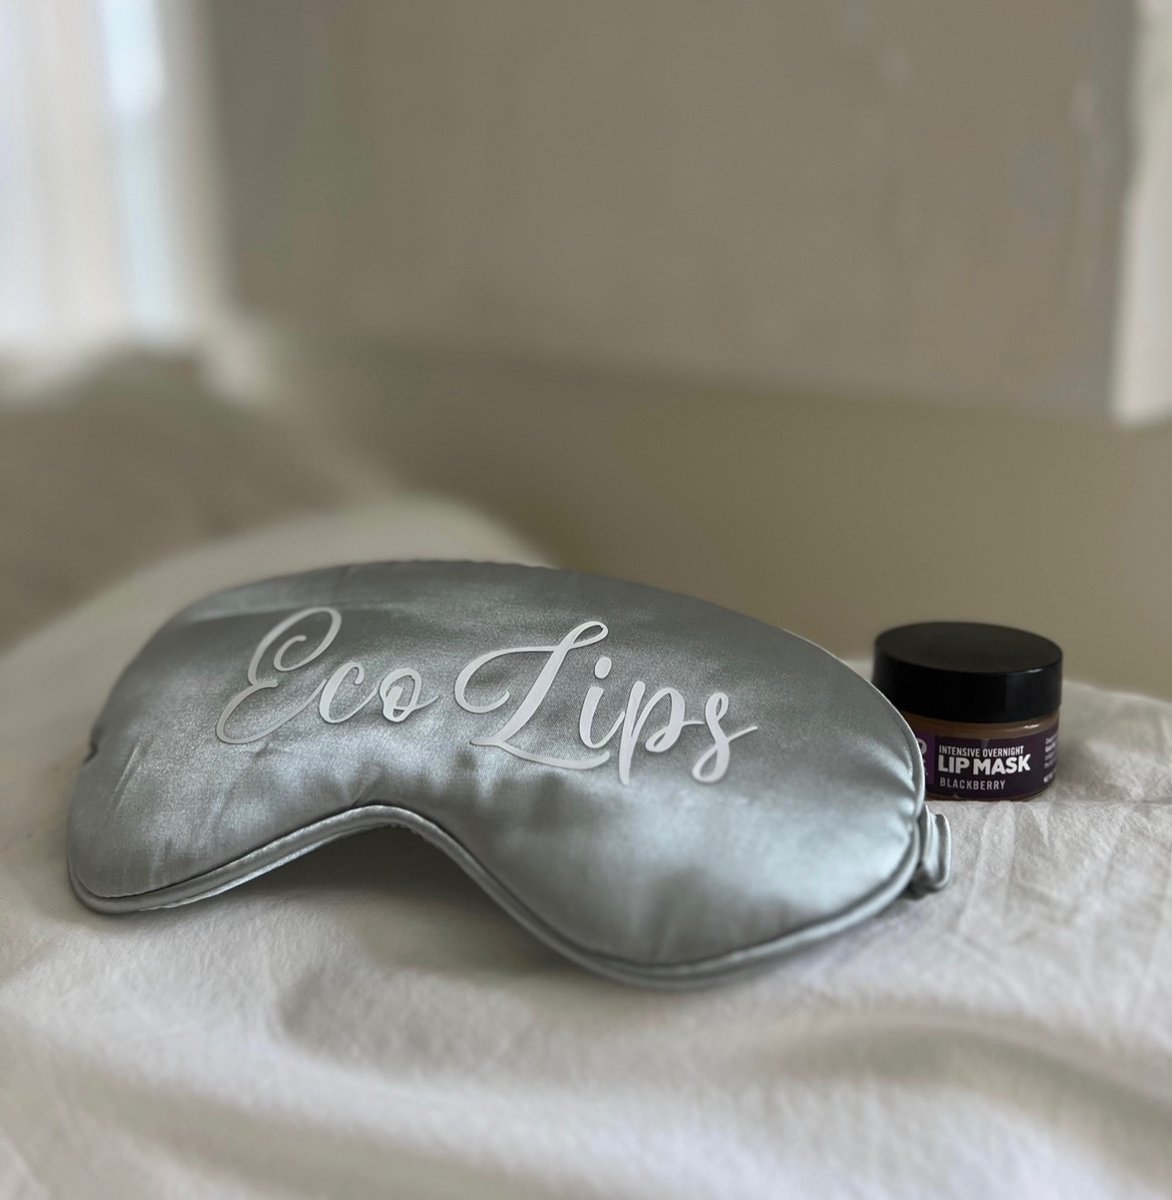 Happy #worldsleepday !💤 Revitalize your lips while you sleep this with our nourishing Overnight Lip Mask! Wake up to smoother, softer lips, ready to take on the day ahead.